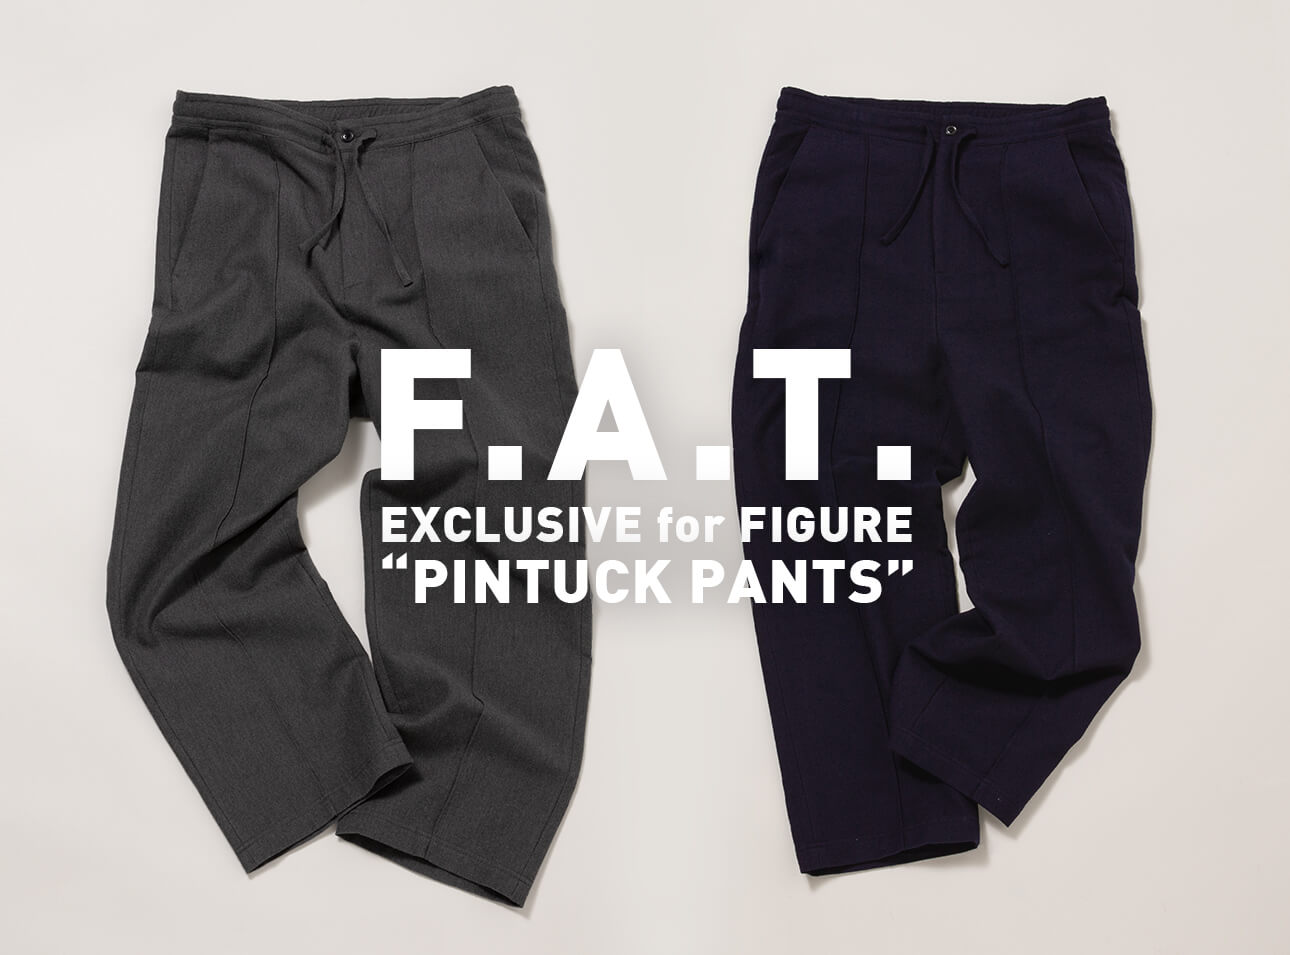 FAT EXCLUSIVE for FIGURE “PINTUCK PANTS”